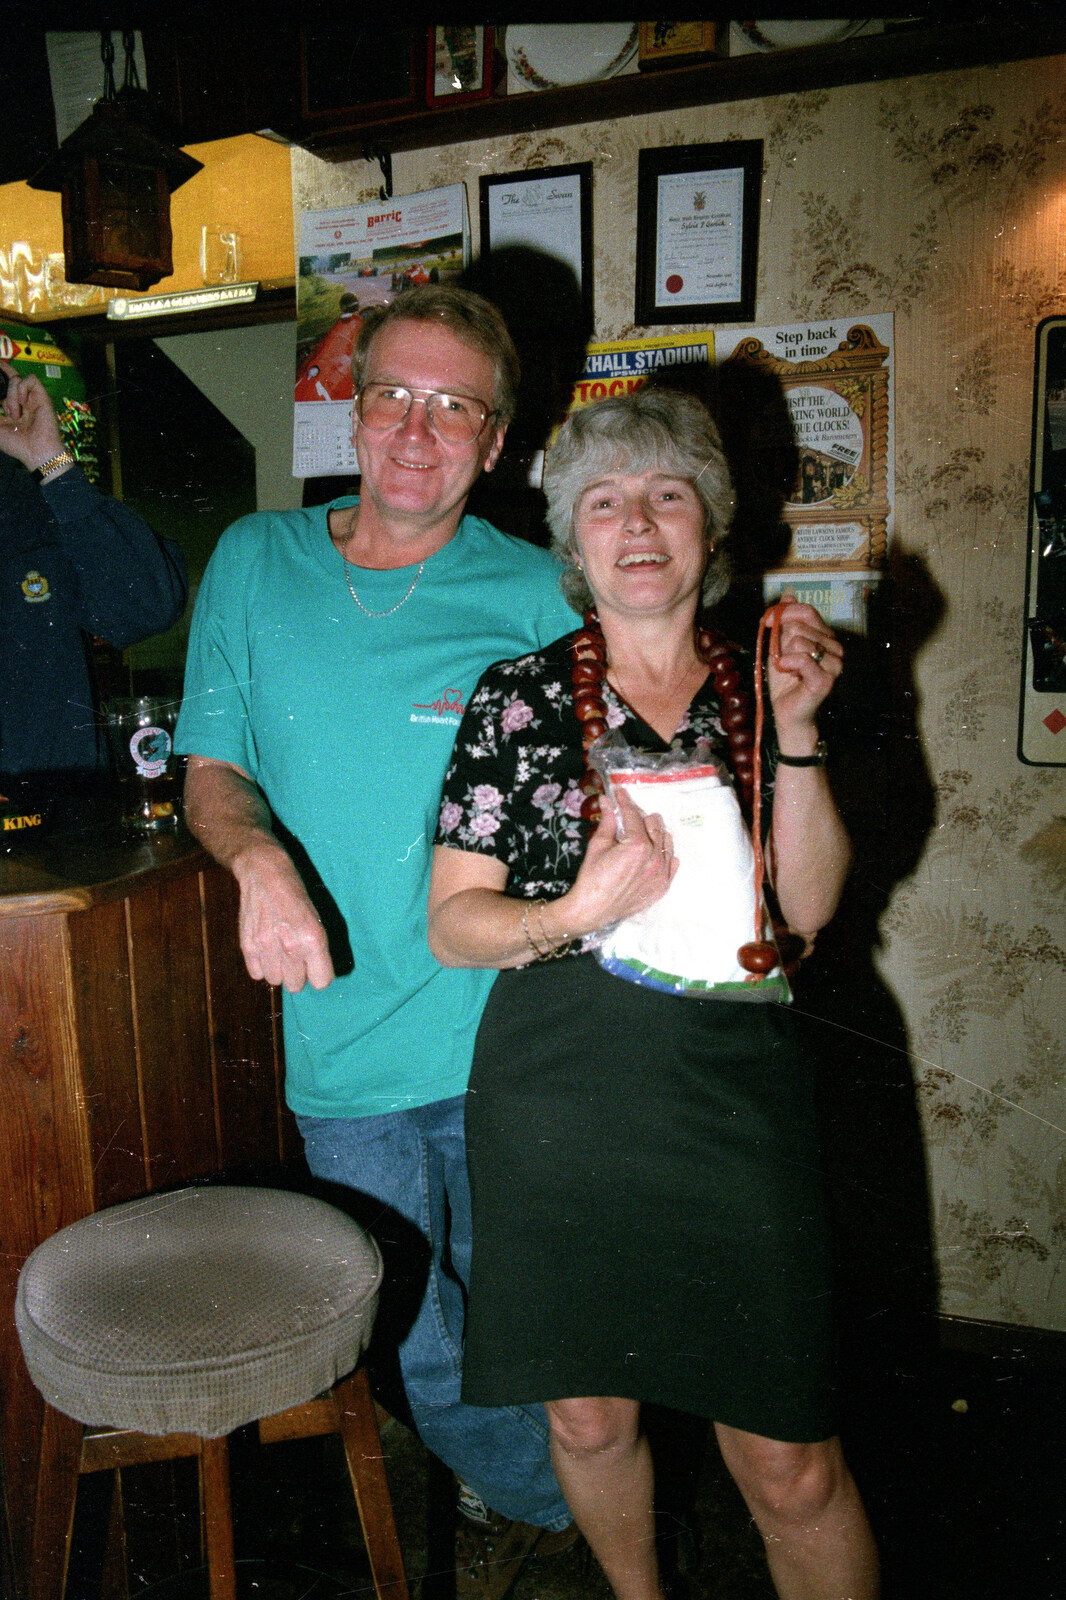 John Willy and Spammy, with her winning nut from A Conkers Night and CISU in the Eagle, Brome and Ipswich, Suffolk - 14th September 1996